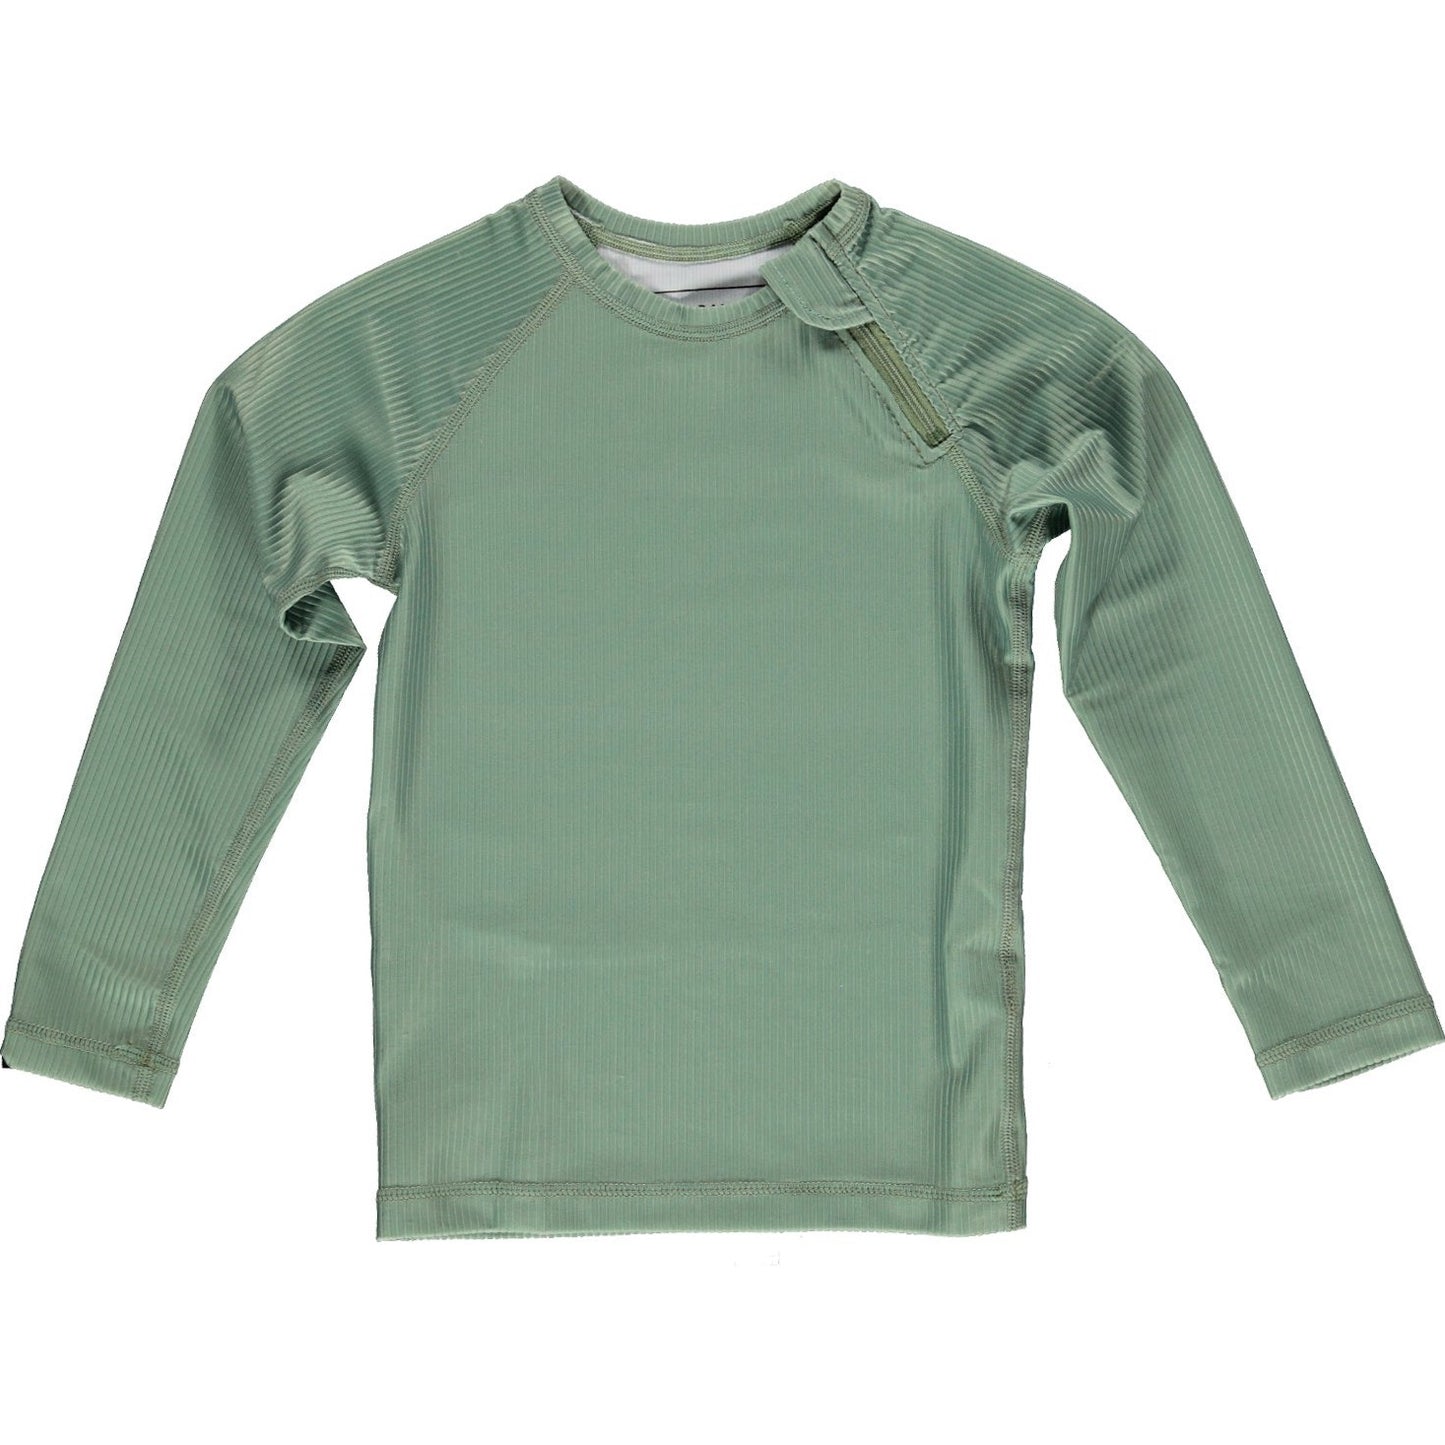 This picture shows  a ribbed basil green, UPF50+ long sleeve rashie